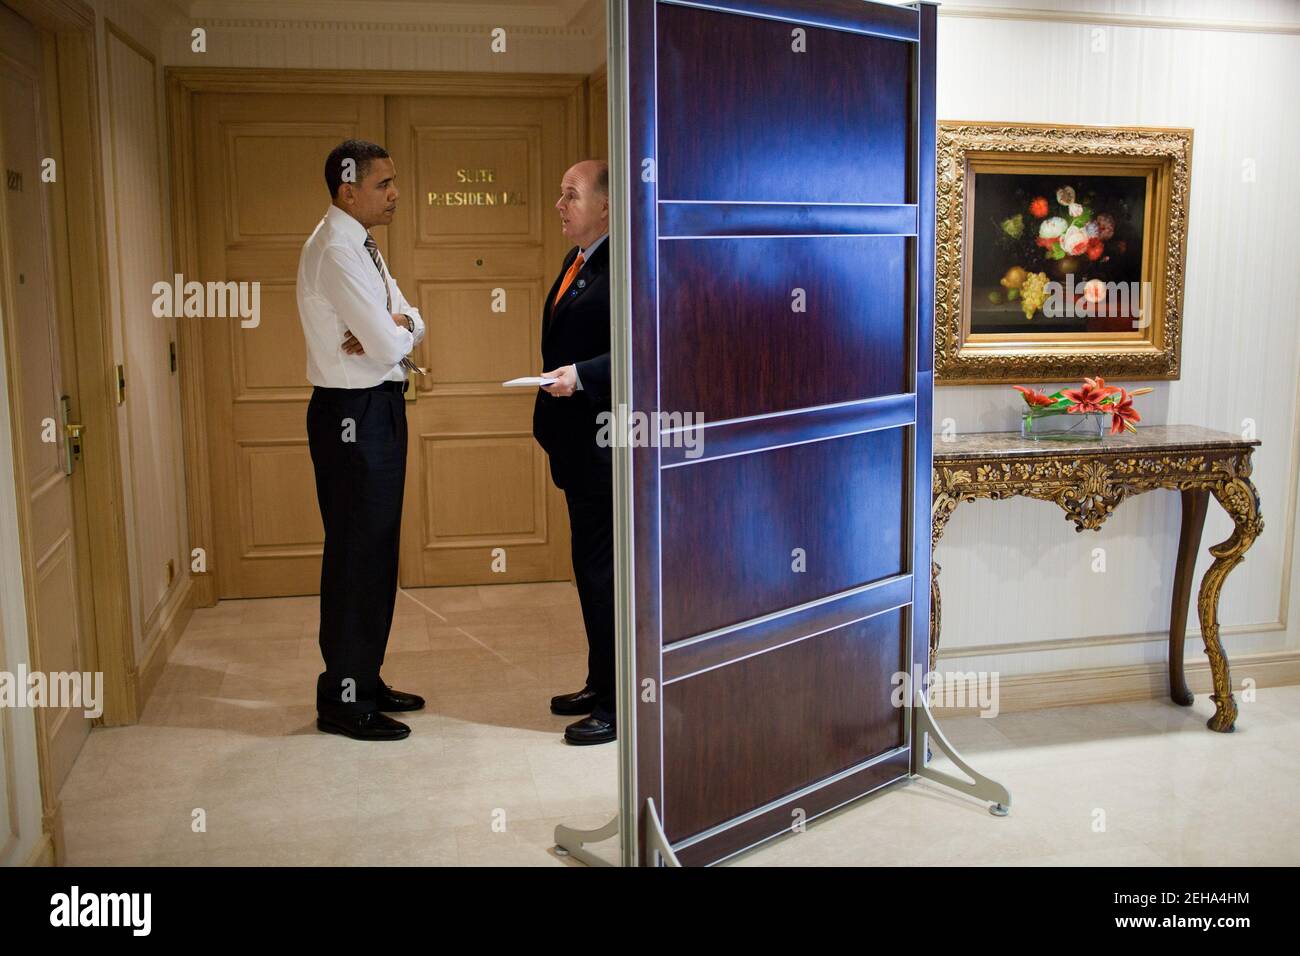 President Barack Obama talks with National Security Advisor Tom Donilon in the hallway outside his hotel suite in Santiago, Chile, March 21, 2011. Stock Photo